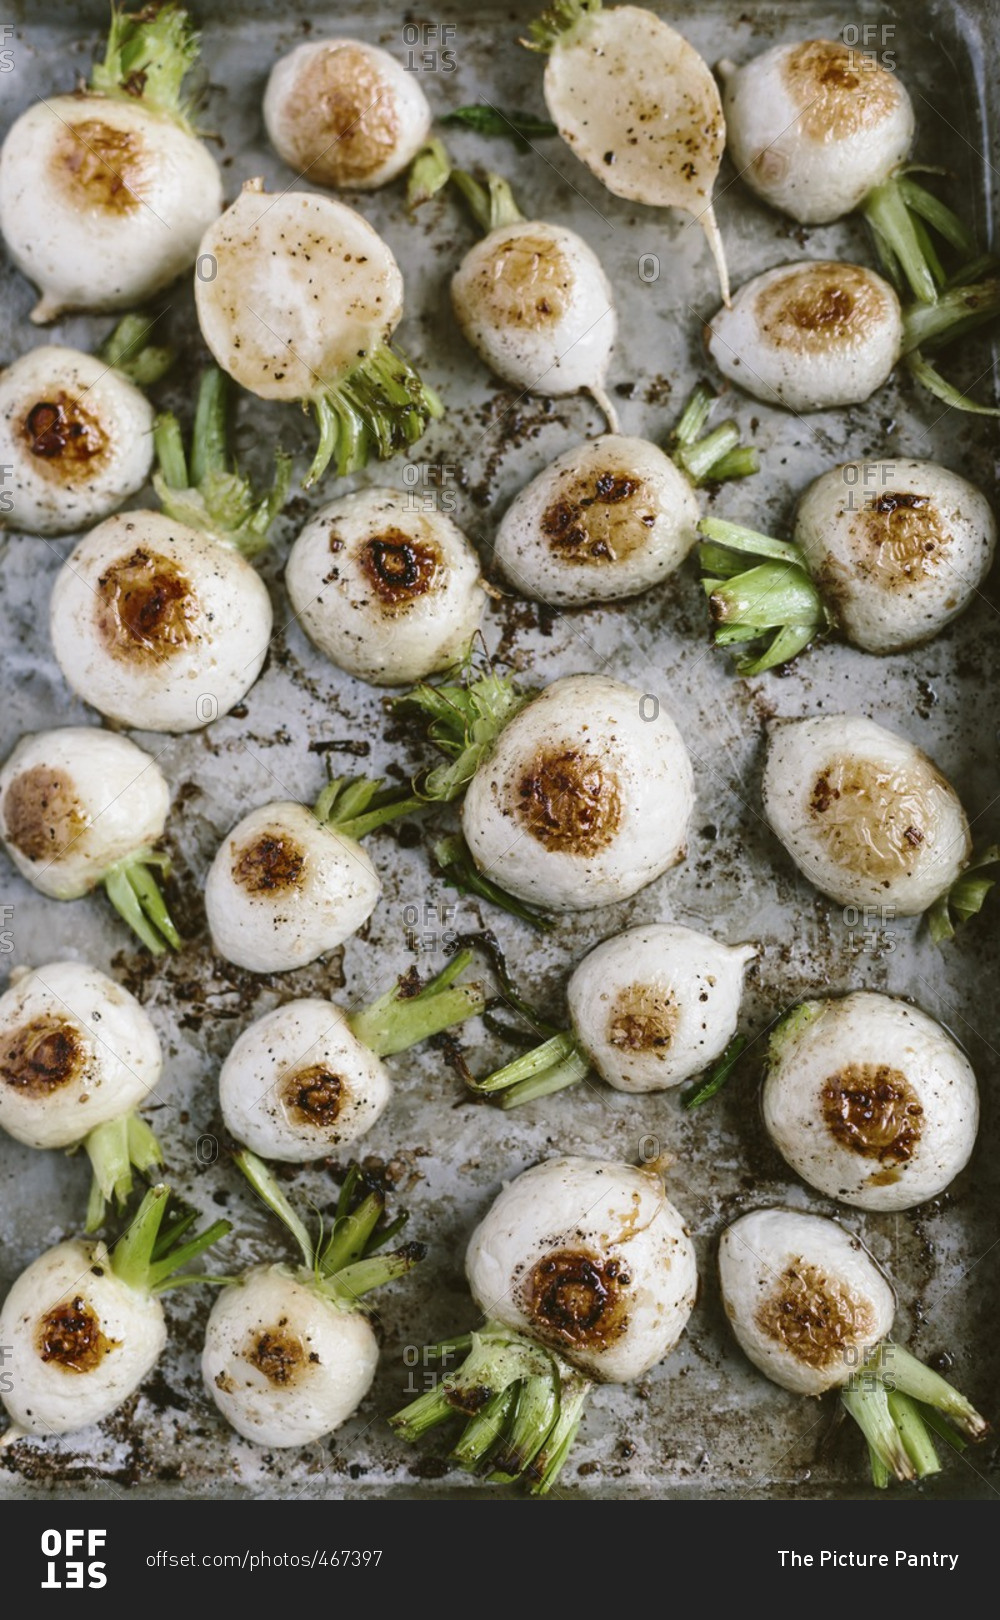 Roasted Japanese turnips on a sheet pan from the oven